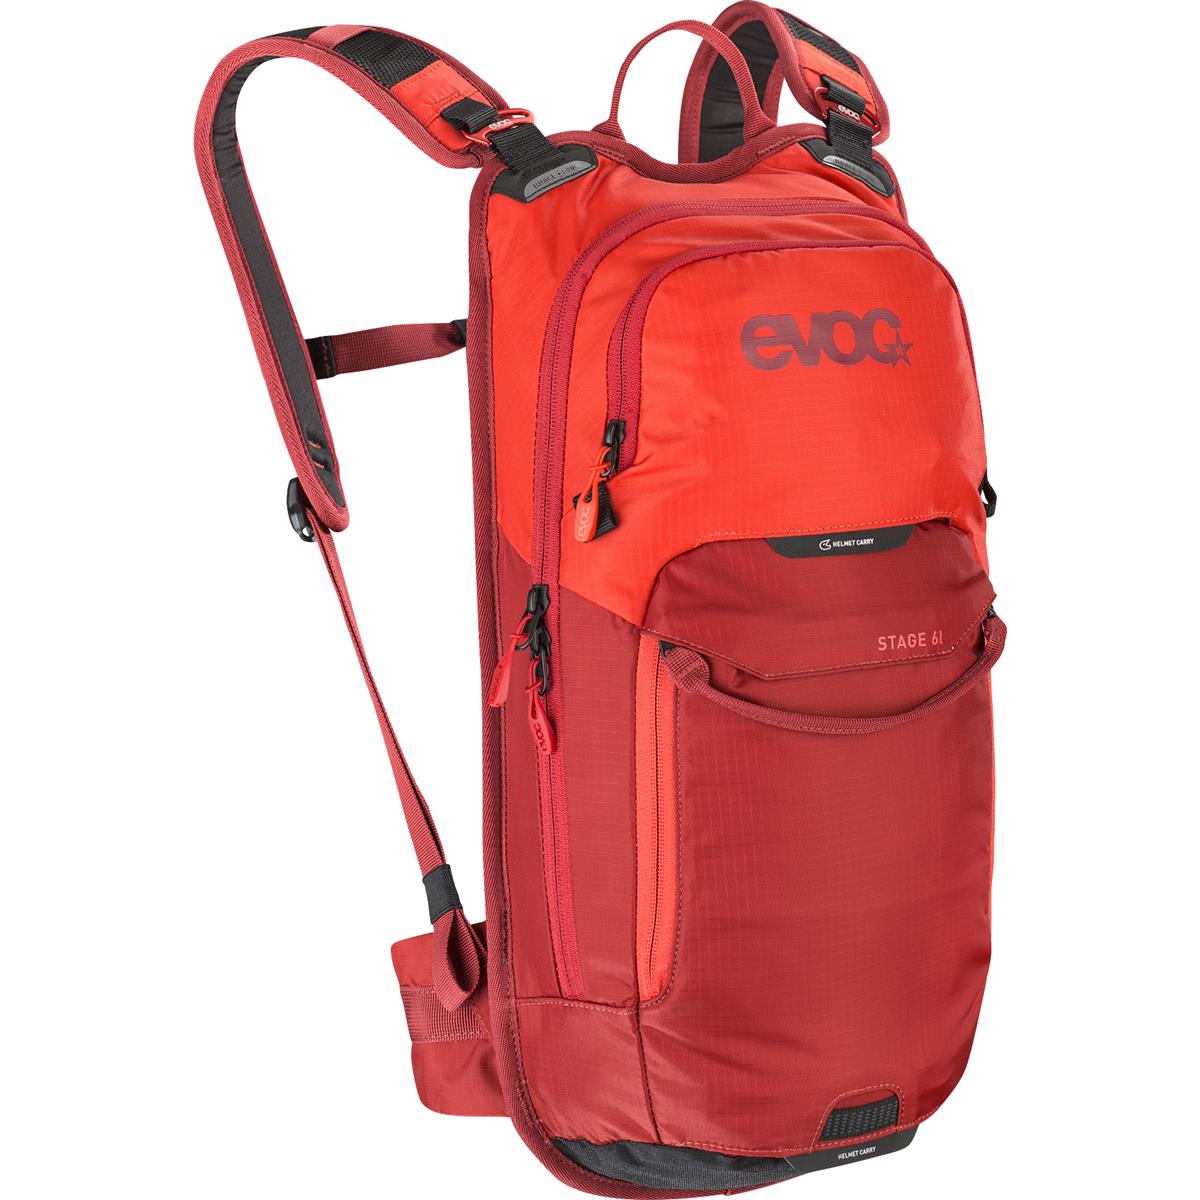 Evoc Backpack with Hydration System Compartment Stage 6L - Orange/Chili Red